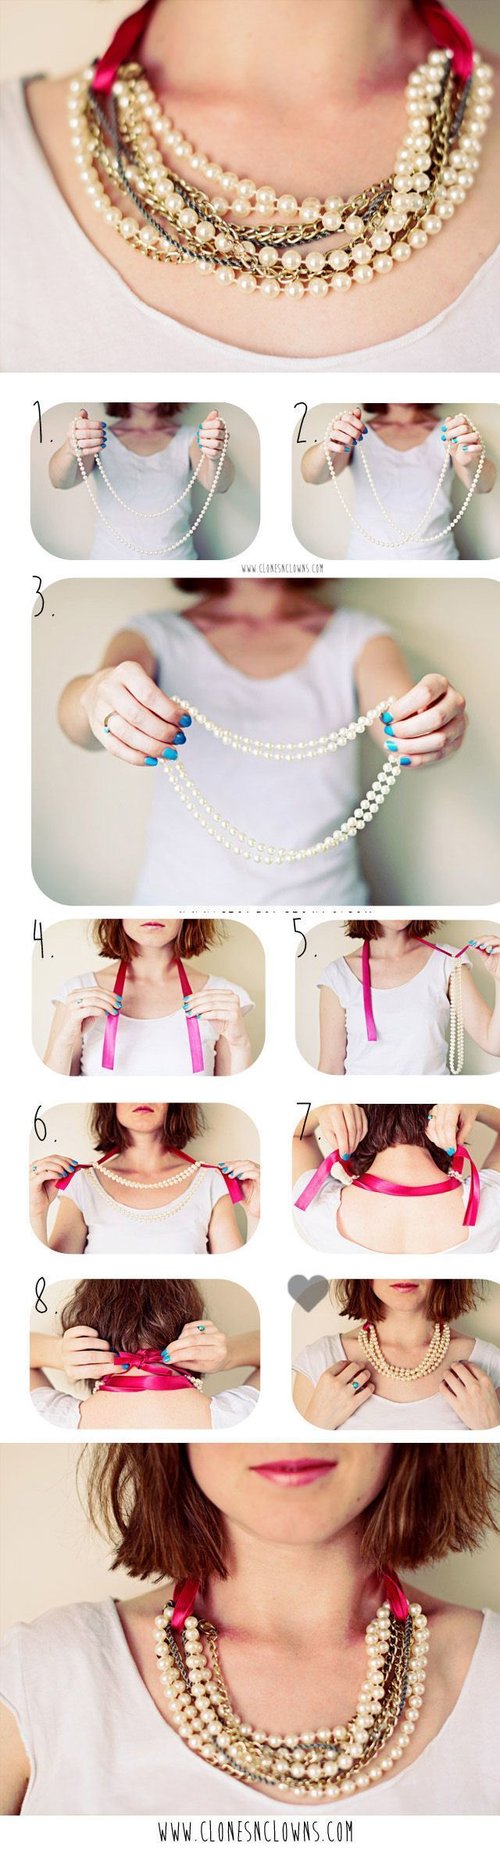 DIY PEARL NECKLACE IN 3 MINUTES